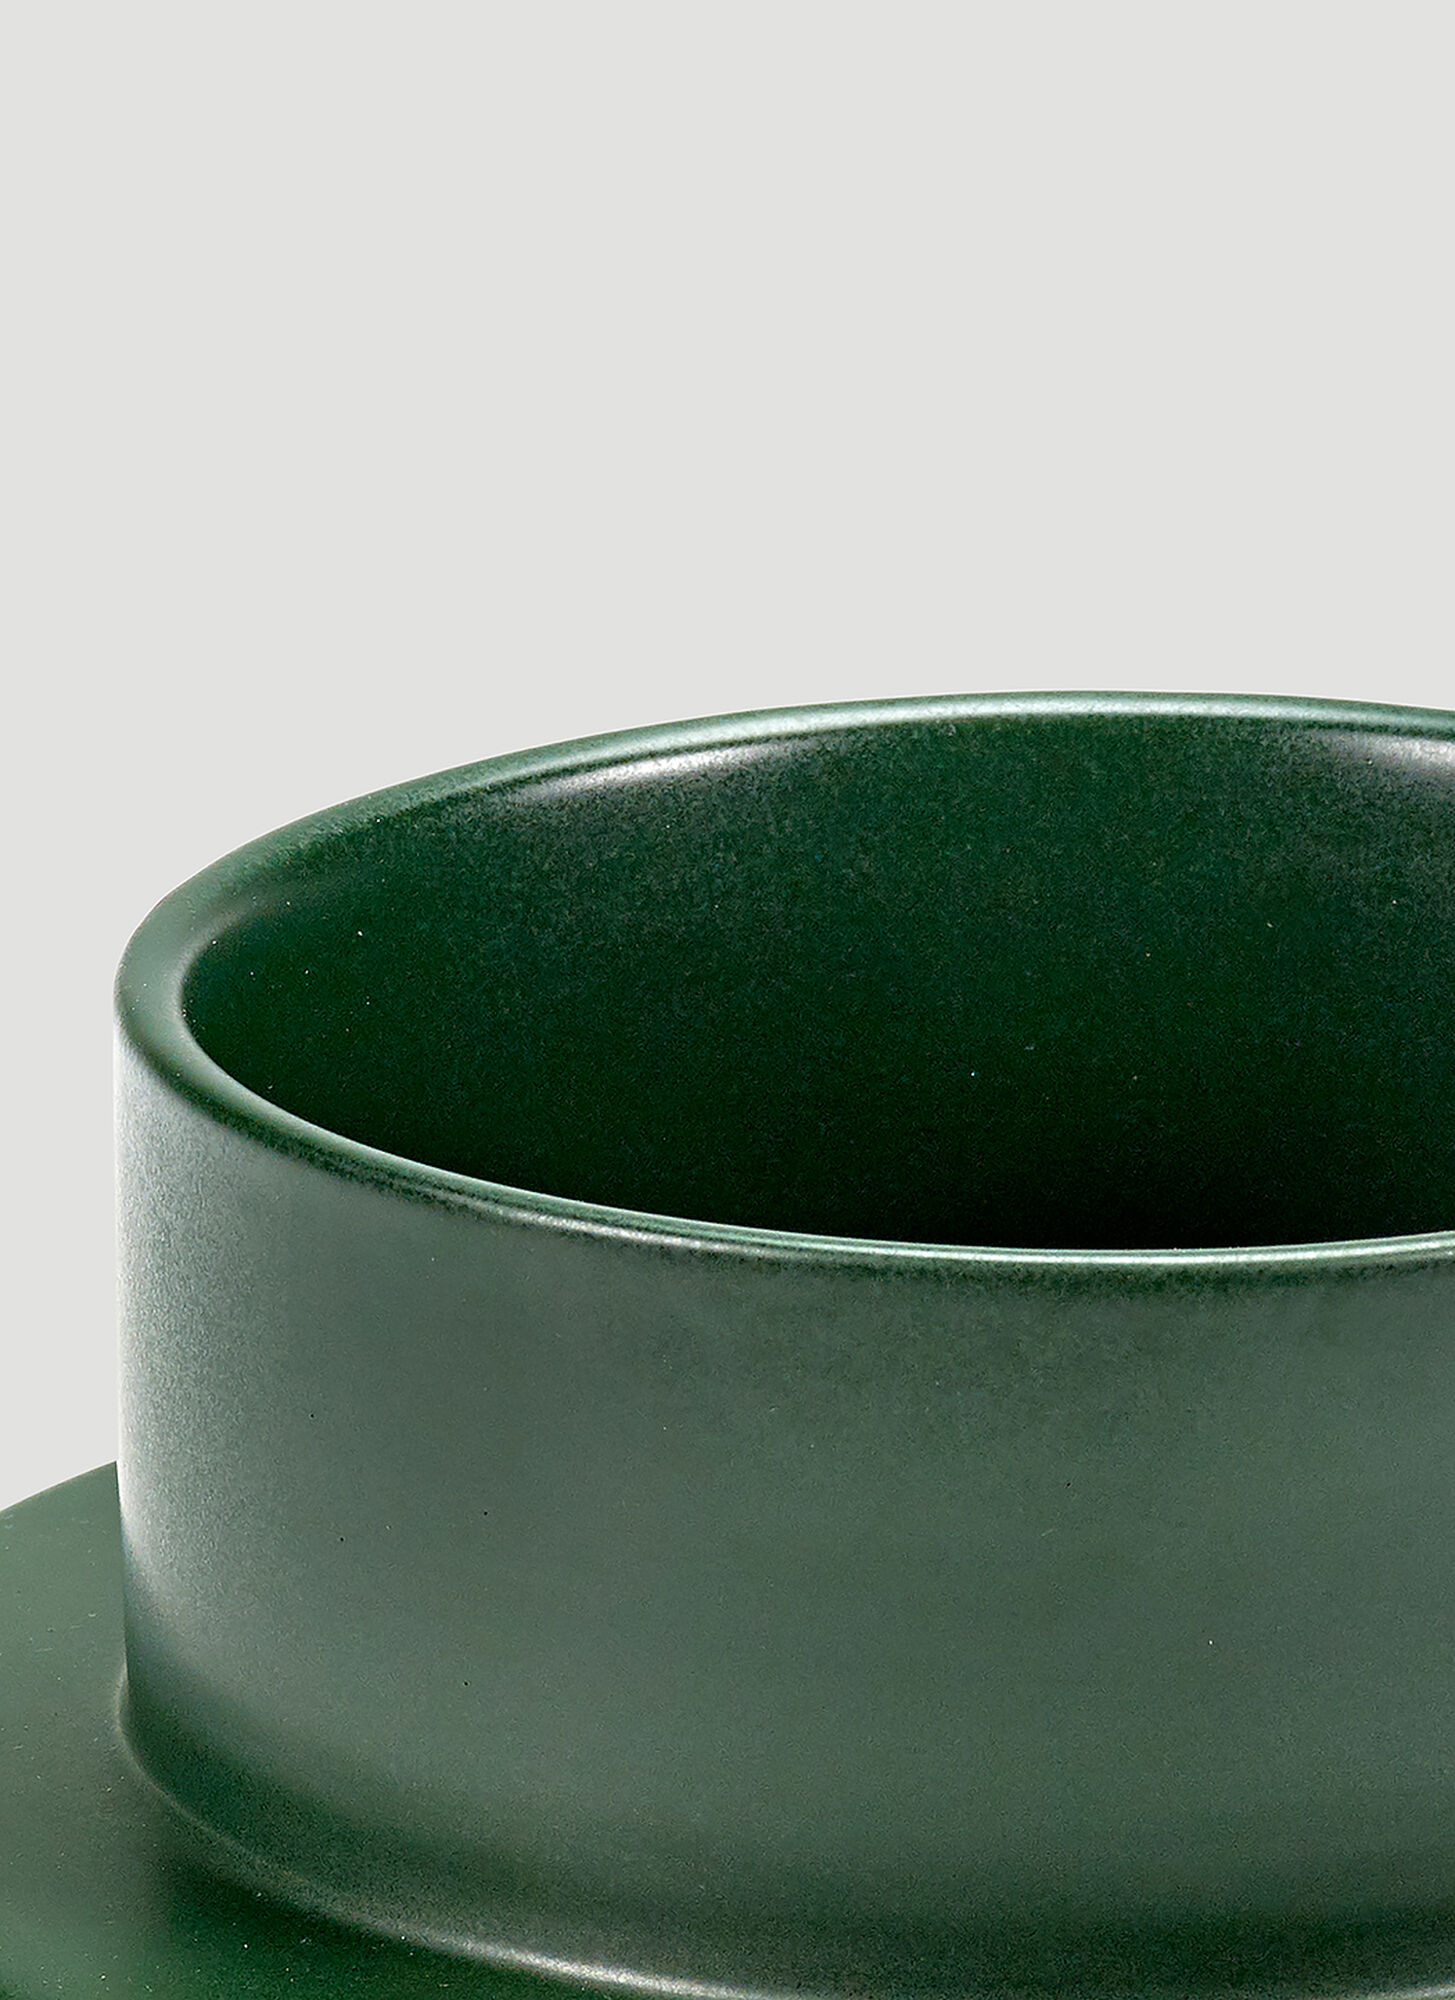  Valerie_objects Valerie_objects Dishes To Dishes Medium Bowl -  Kitchen Green One Size 